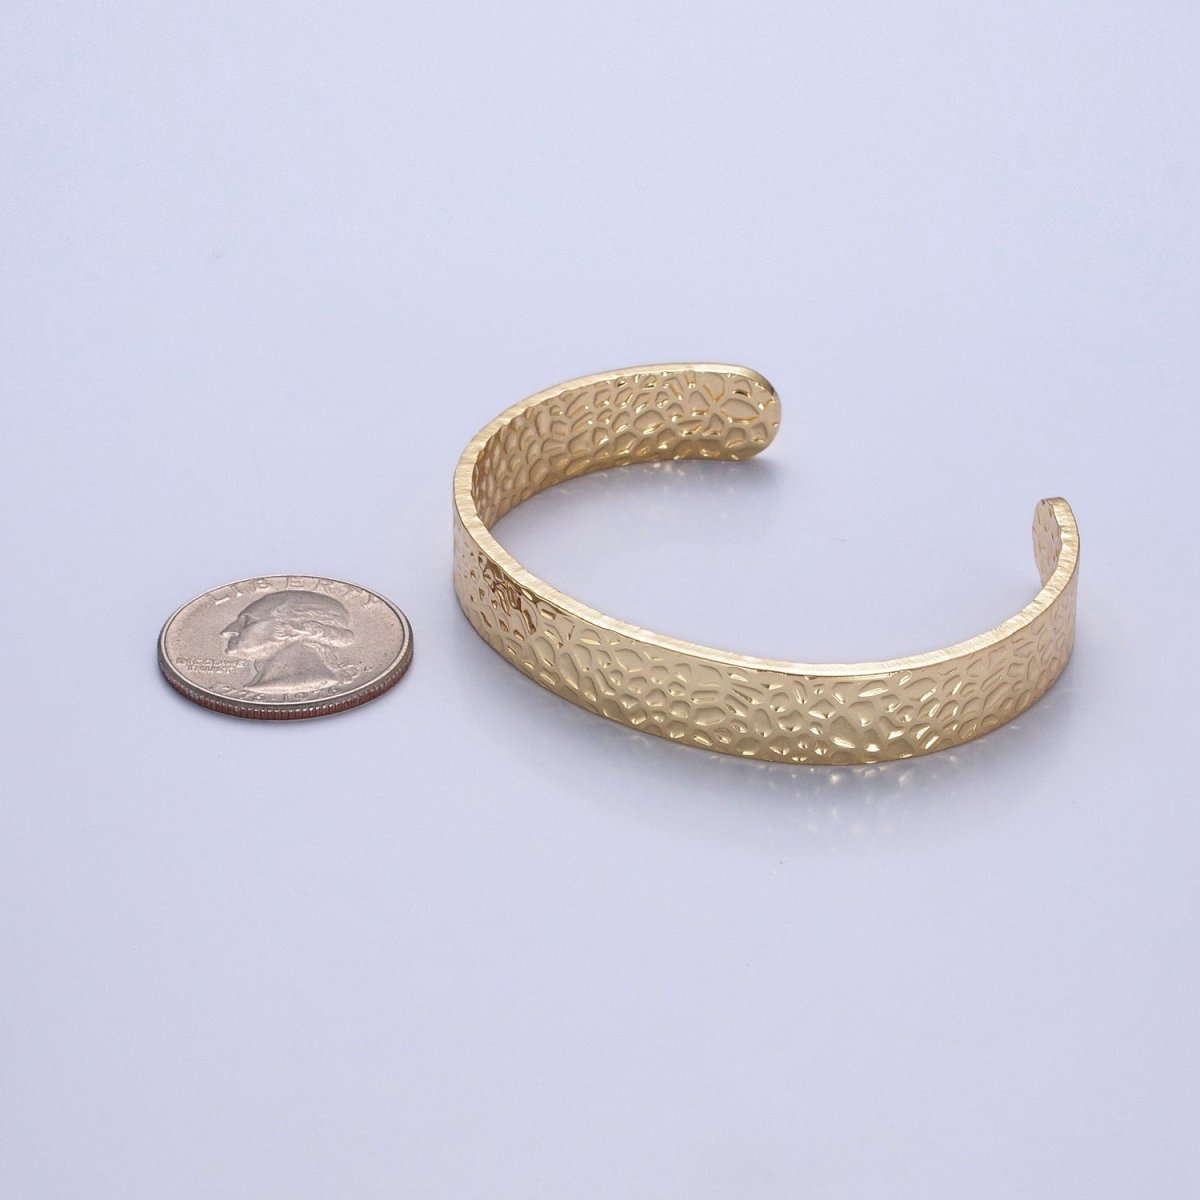 24K Gold Filled Hammered Bangle Bracelet in Gold & Silver | WA-986 WA-987 Clearance Pricing - DLUXCA